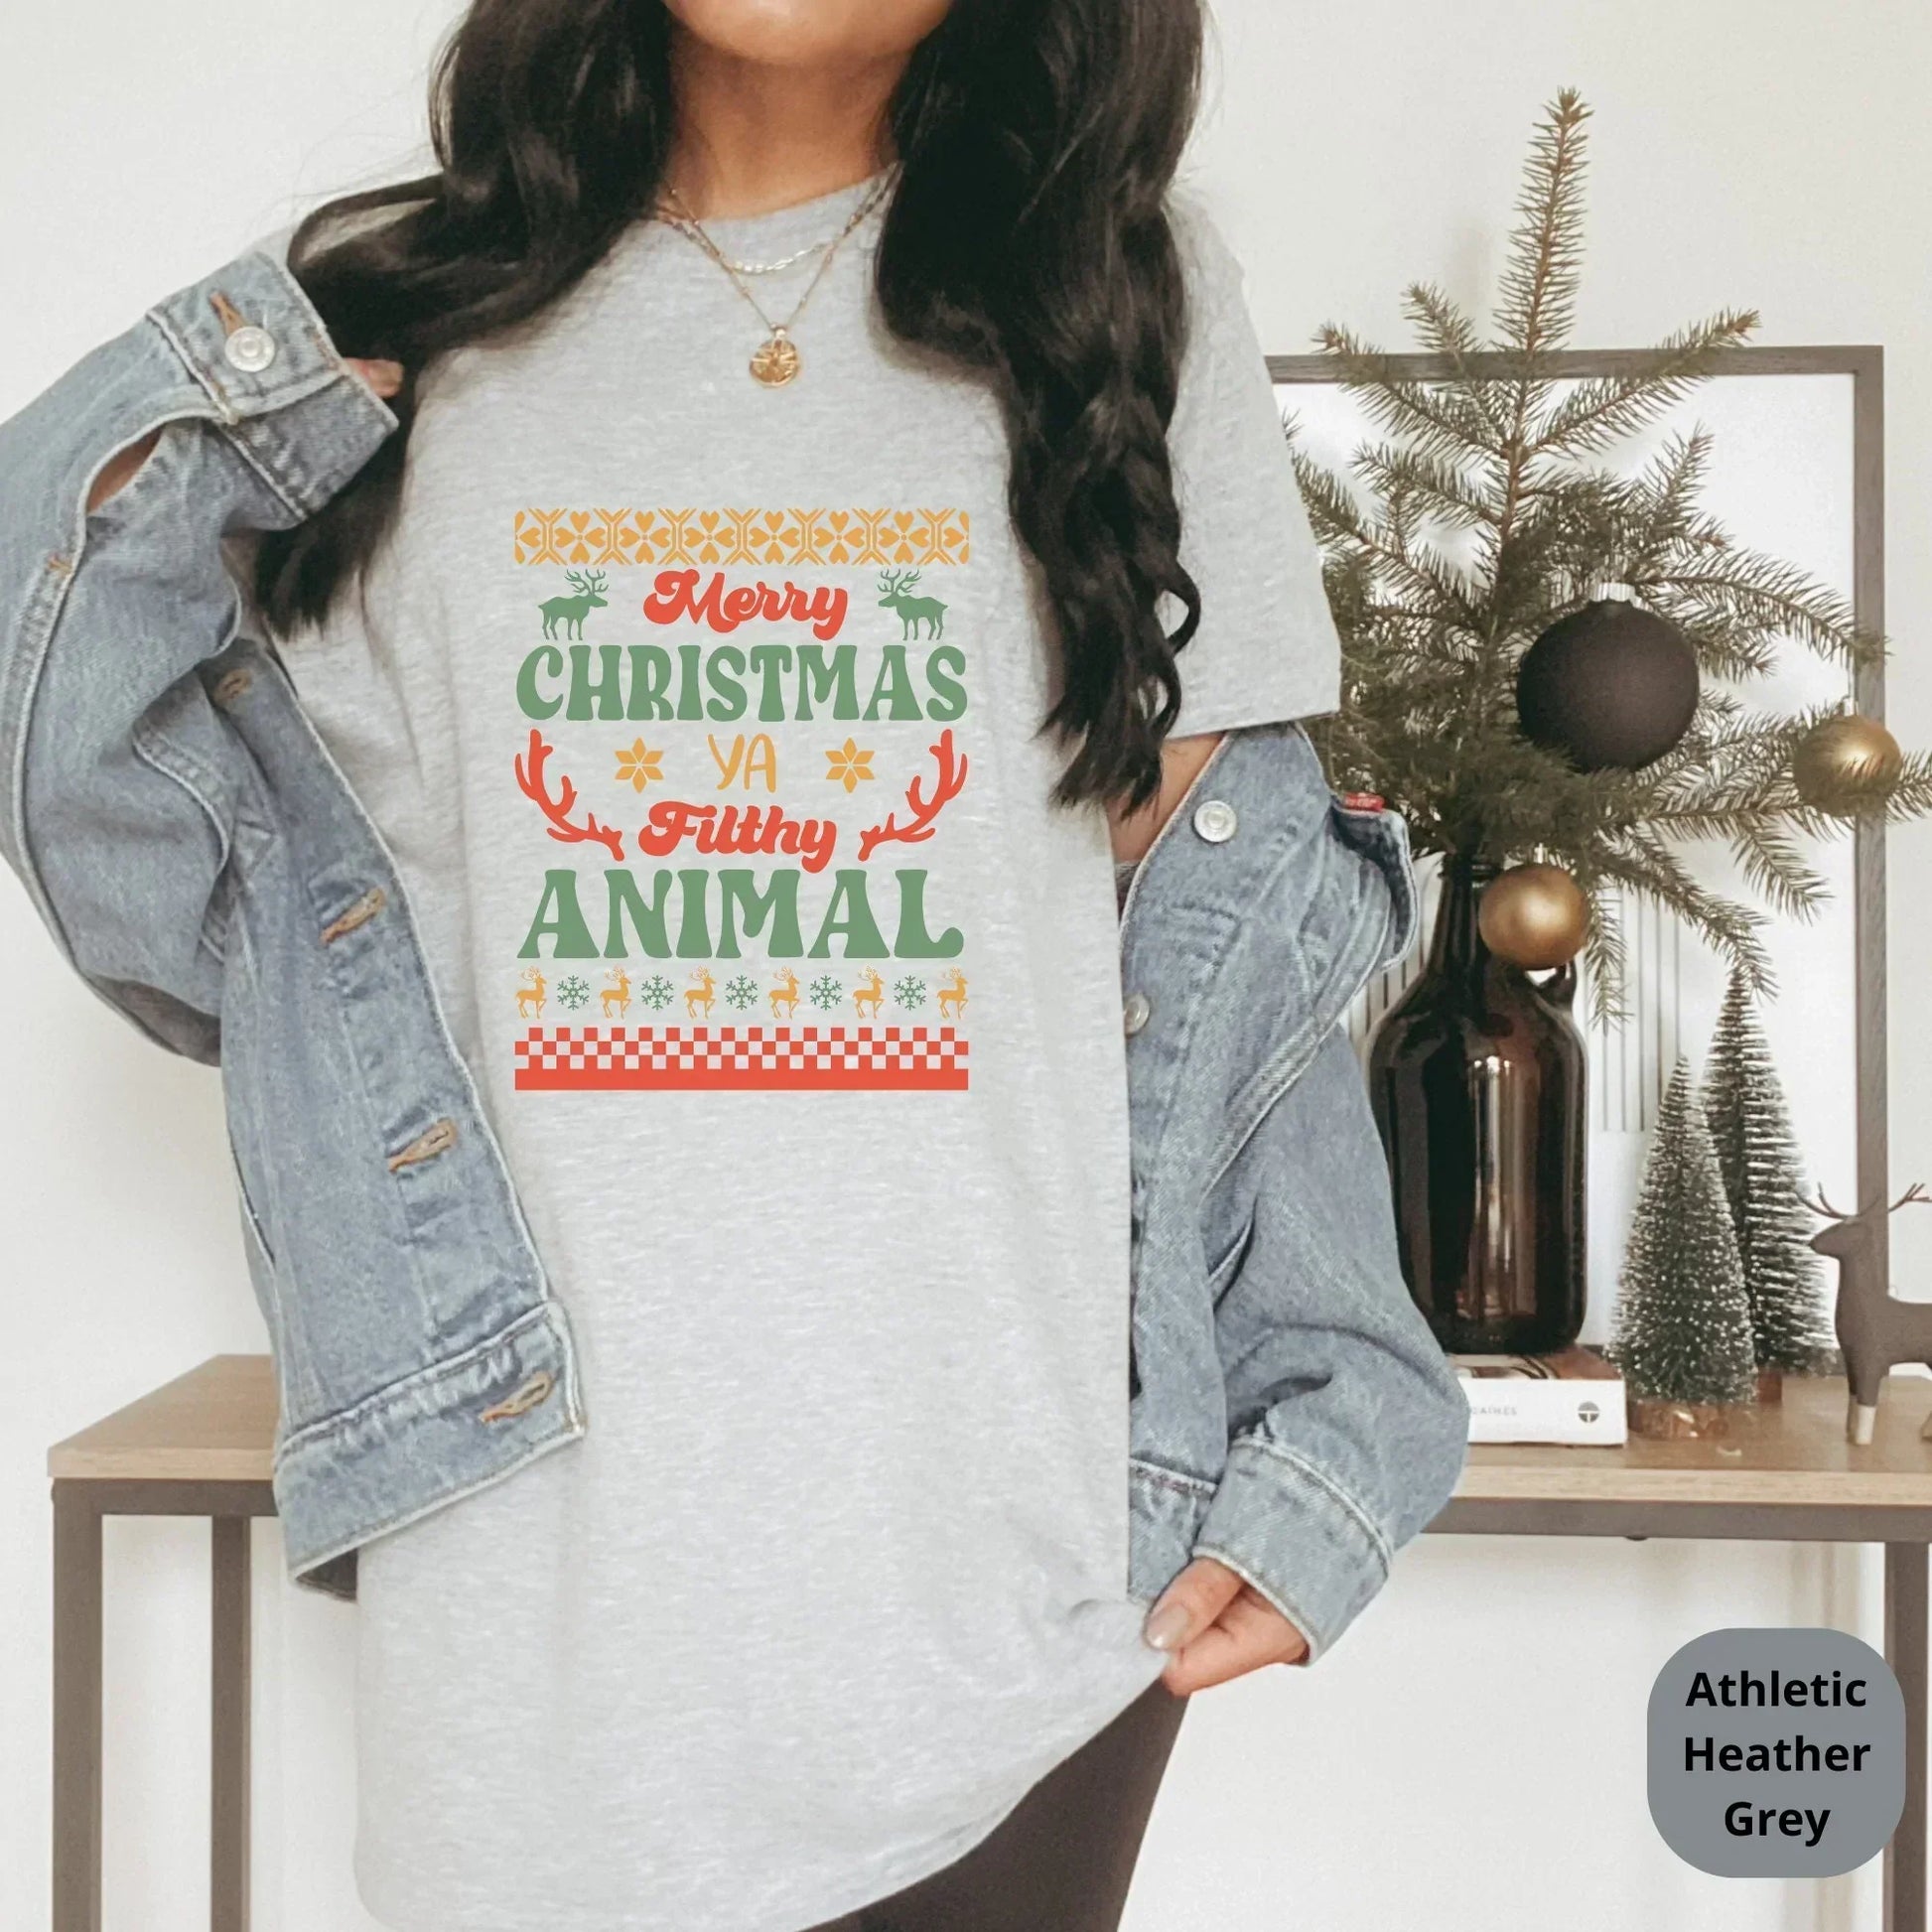 Funny Ugly Christmas Sweater for Men, Hunting Season Sweatshirt, Hunter Christmas Shirt, Xmas Gift for Him, Comfort Colors Oversized Tee HMDesignStudioUS